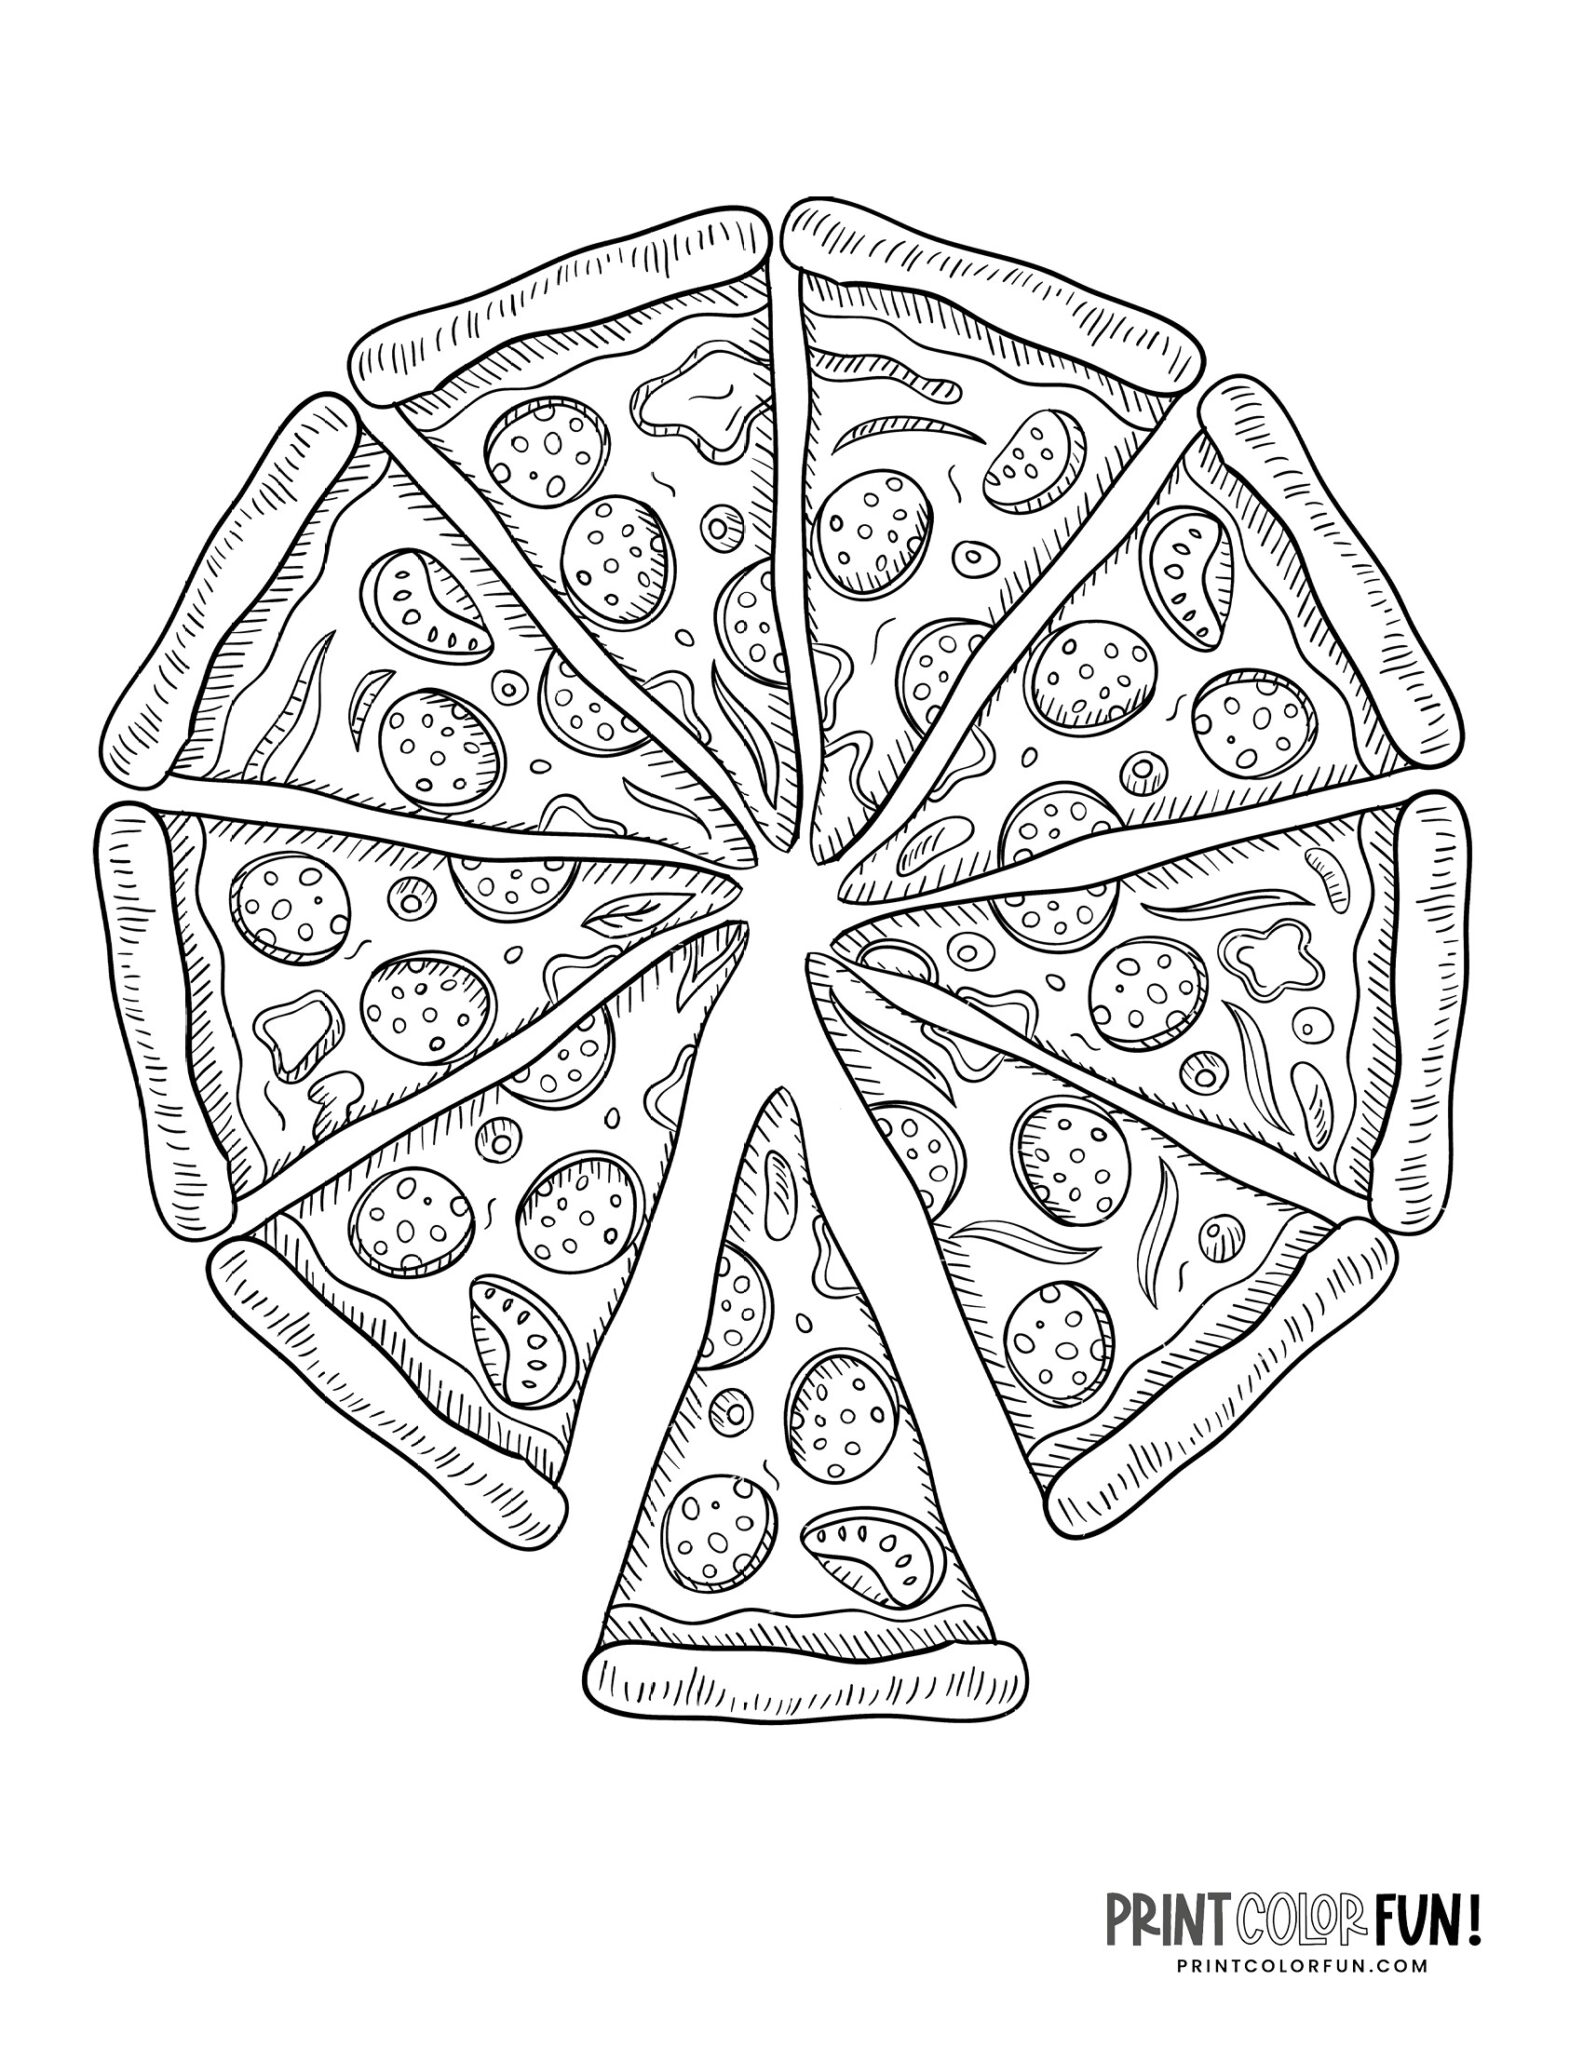 Pizza coloring pages Slices & whole pizza pies Print Color Fun!